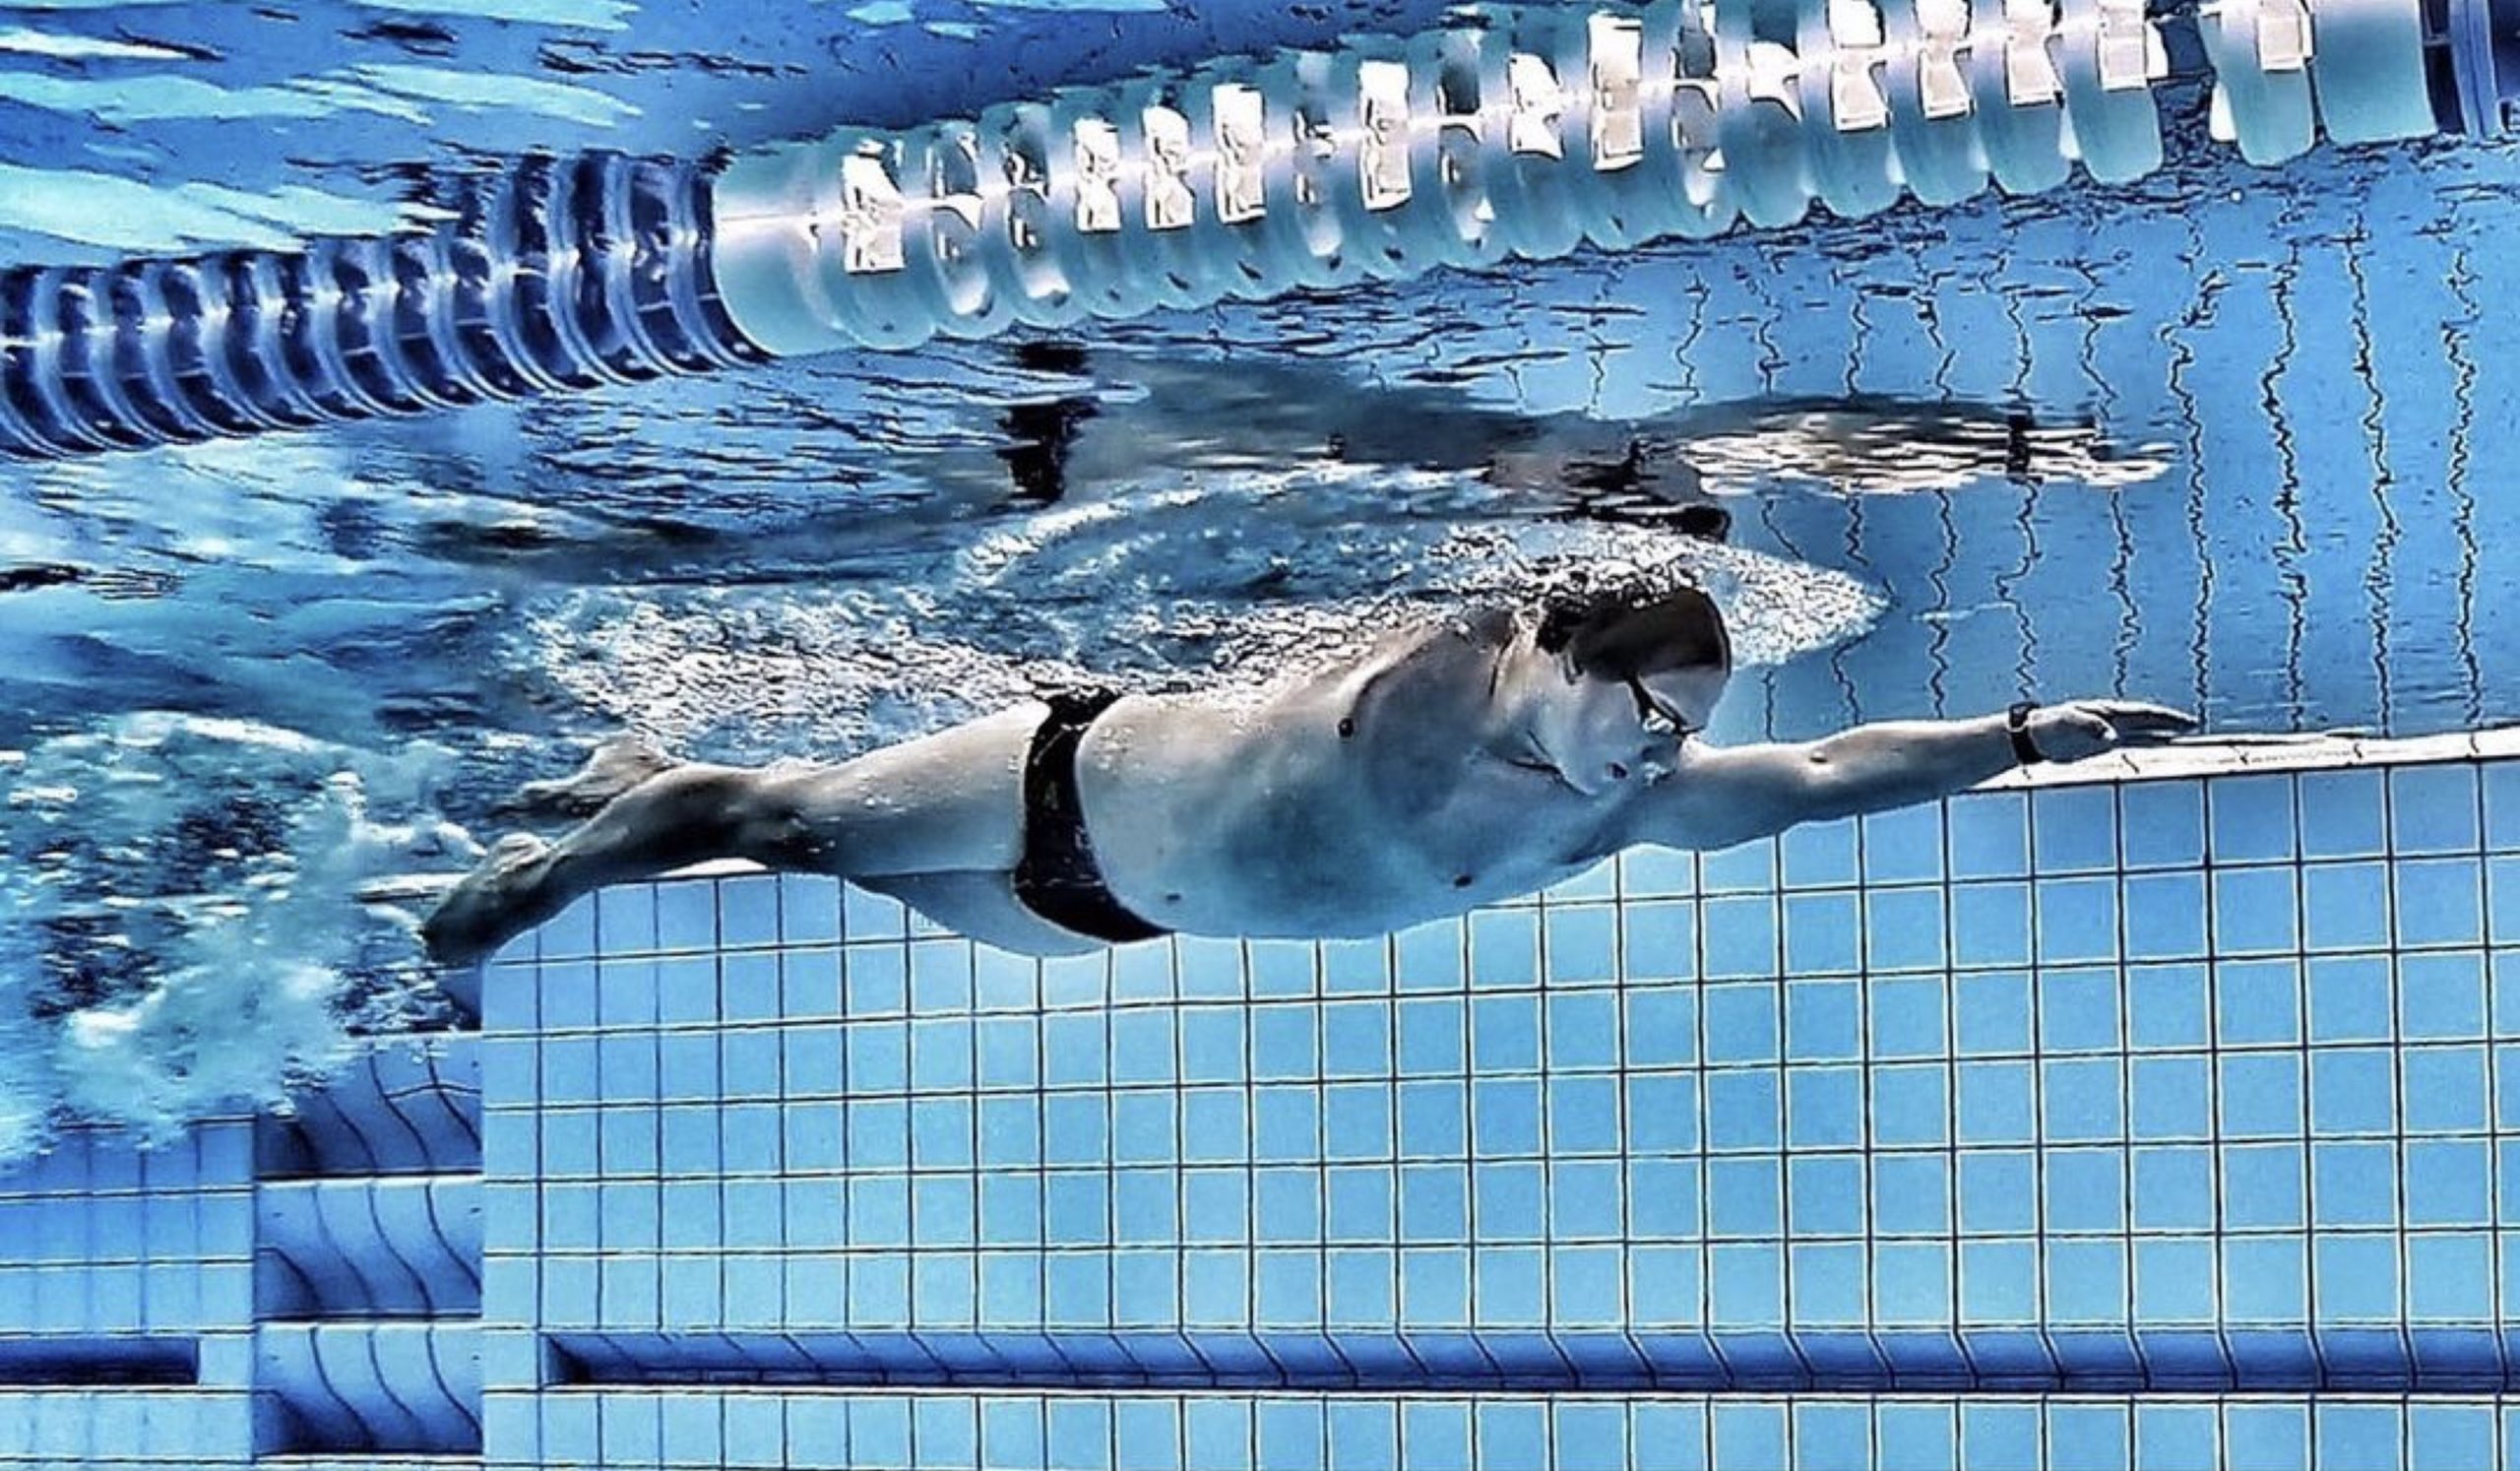 Guidance from former professional swimmer and age group triathlete Markus Marthaler on how to get to the next level with your swim.